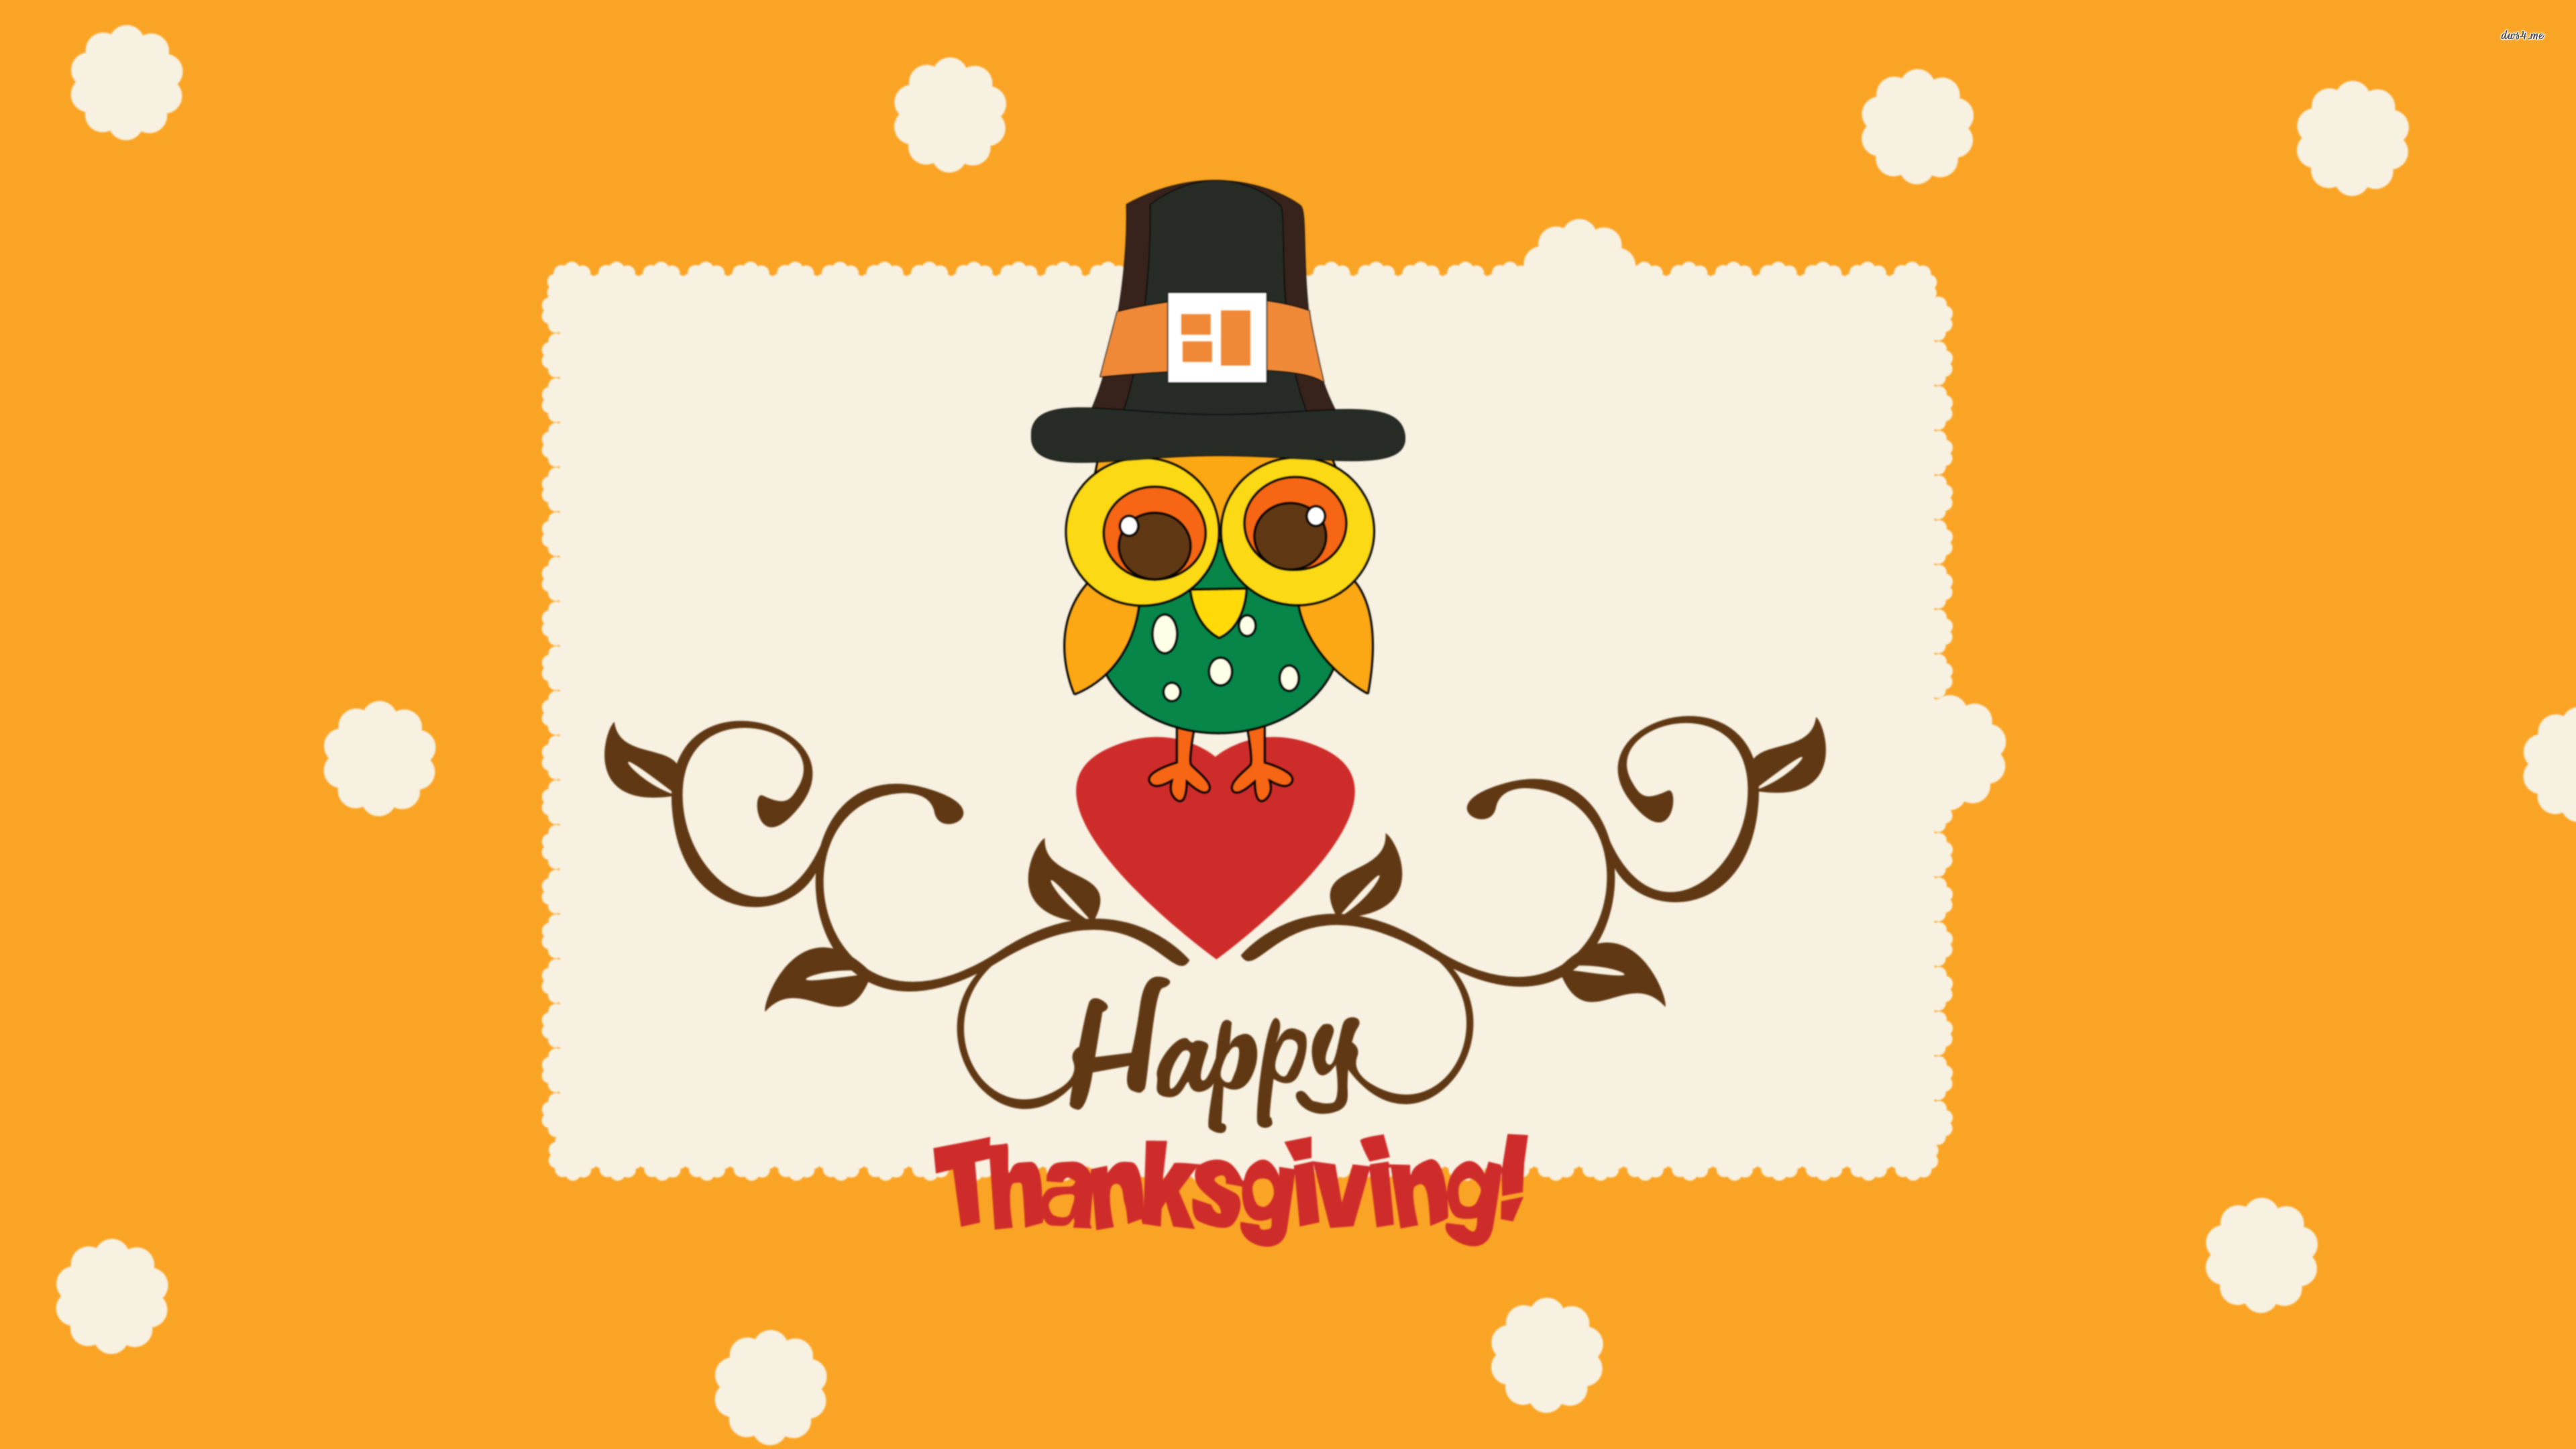 Cute Owl Wishing You Happy Thanksgiving Wallpaper Holiday